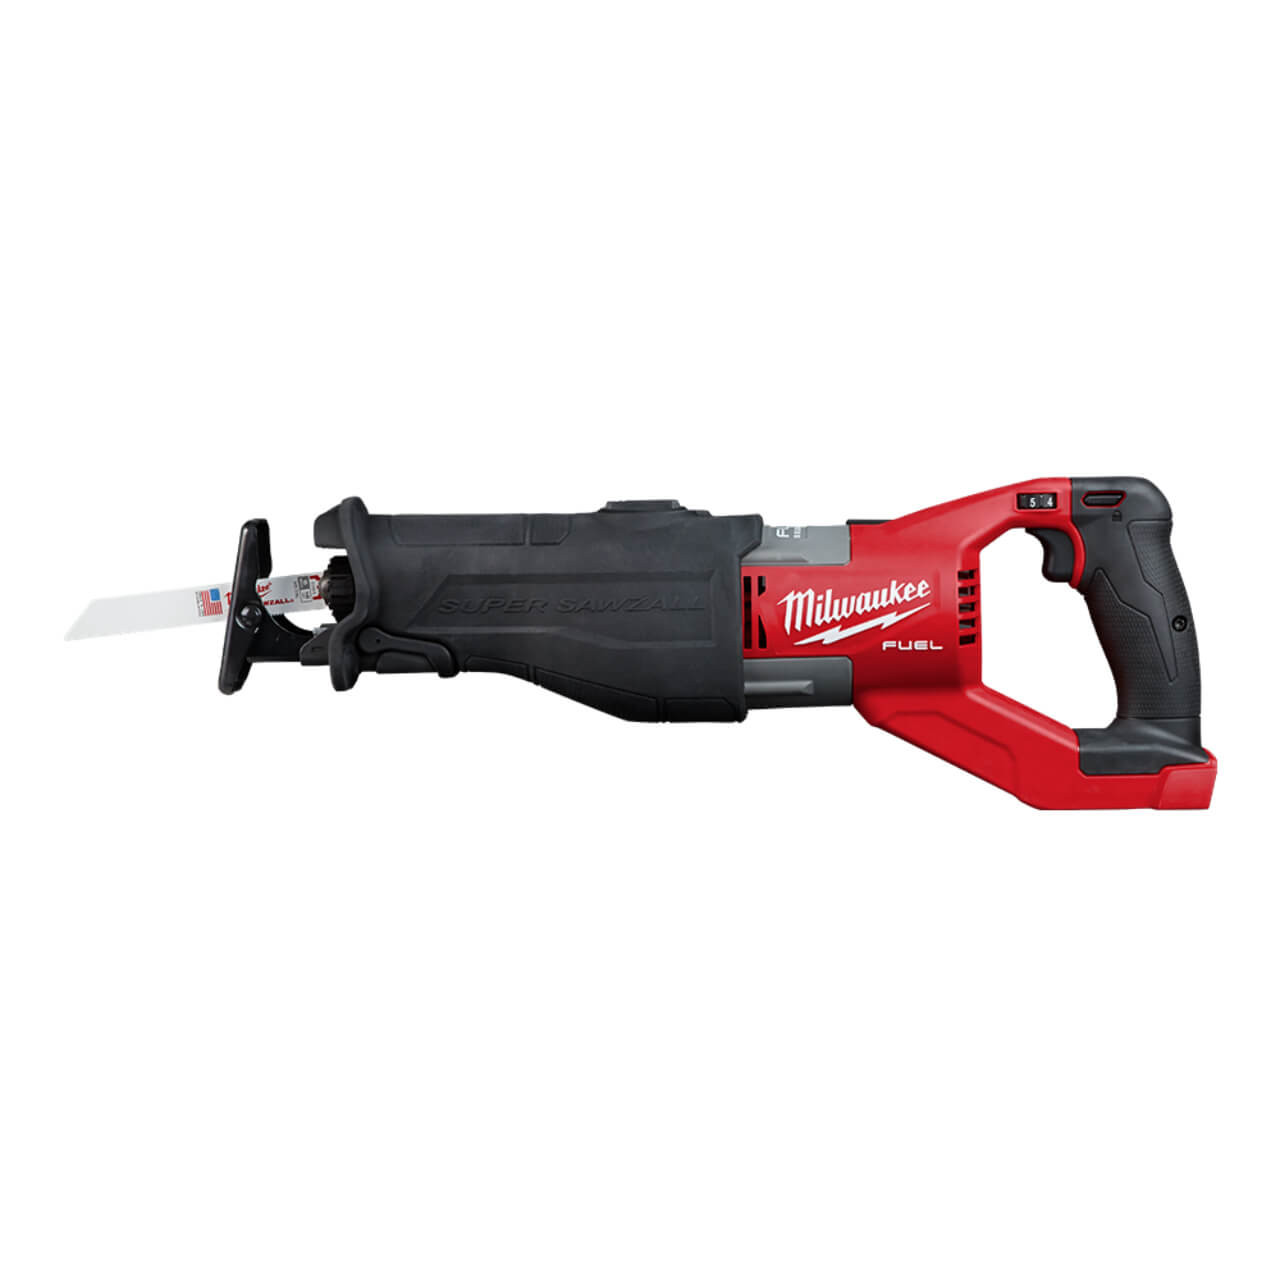 Milwaukee M18 Fuel Super Sawzall Cordless Reciprocating Saw Skin Only